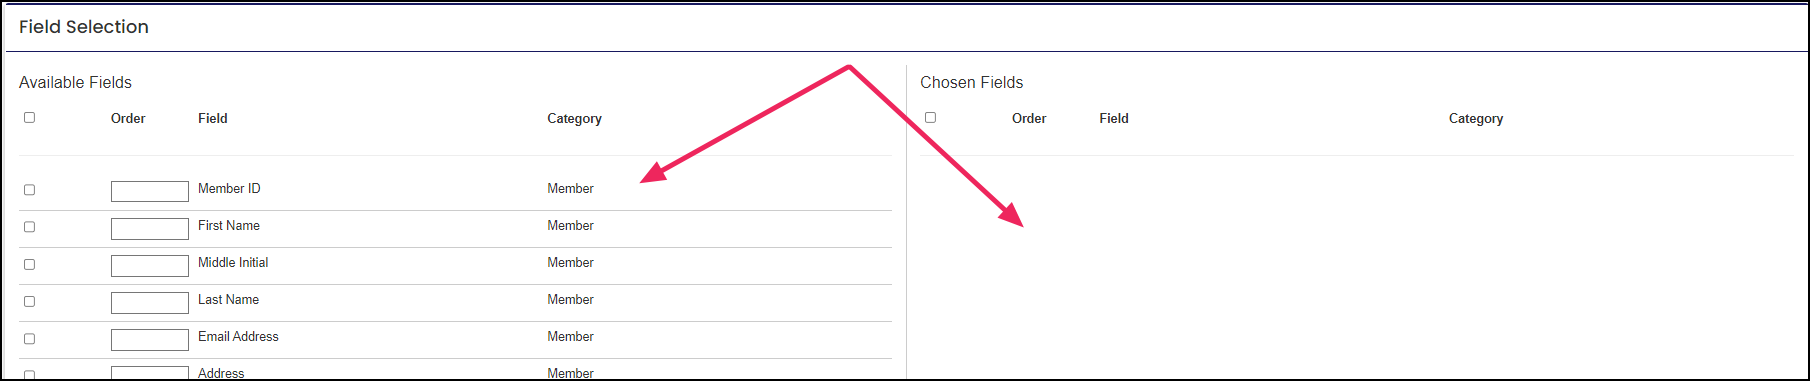 Image shows available fields and chosen fields.